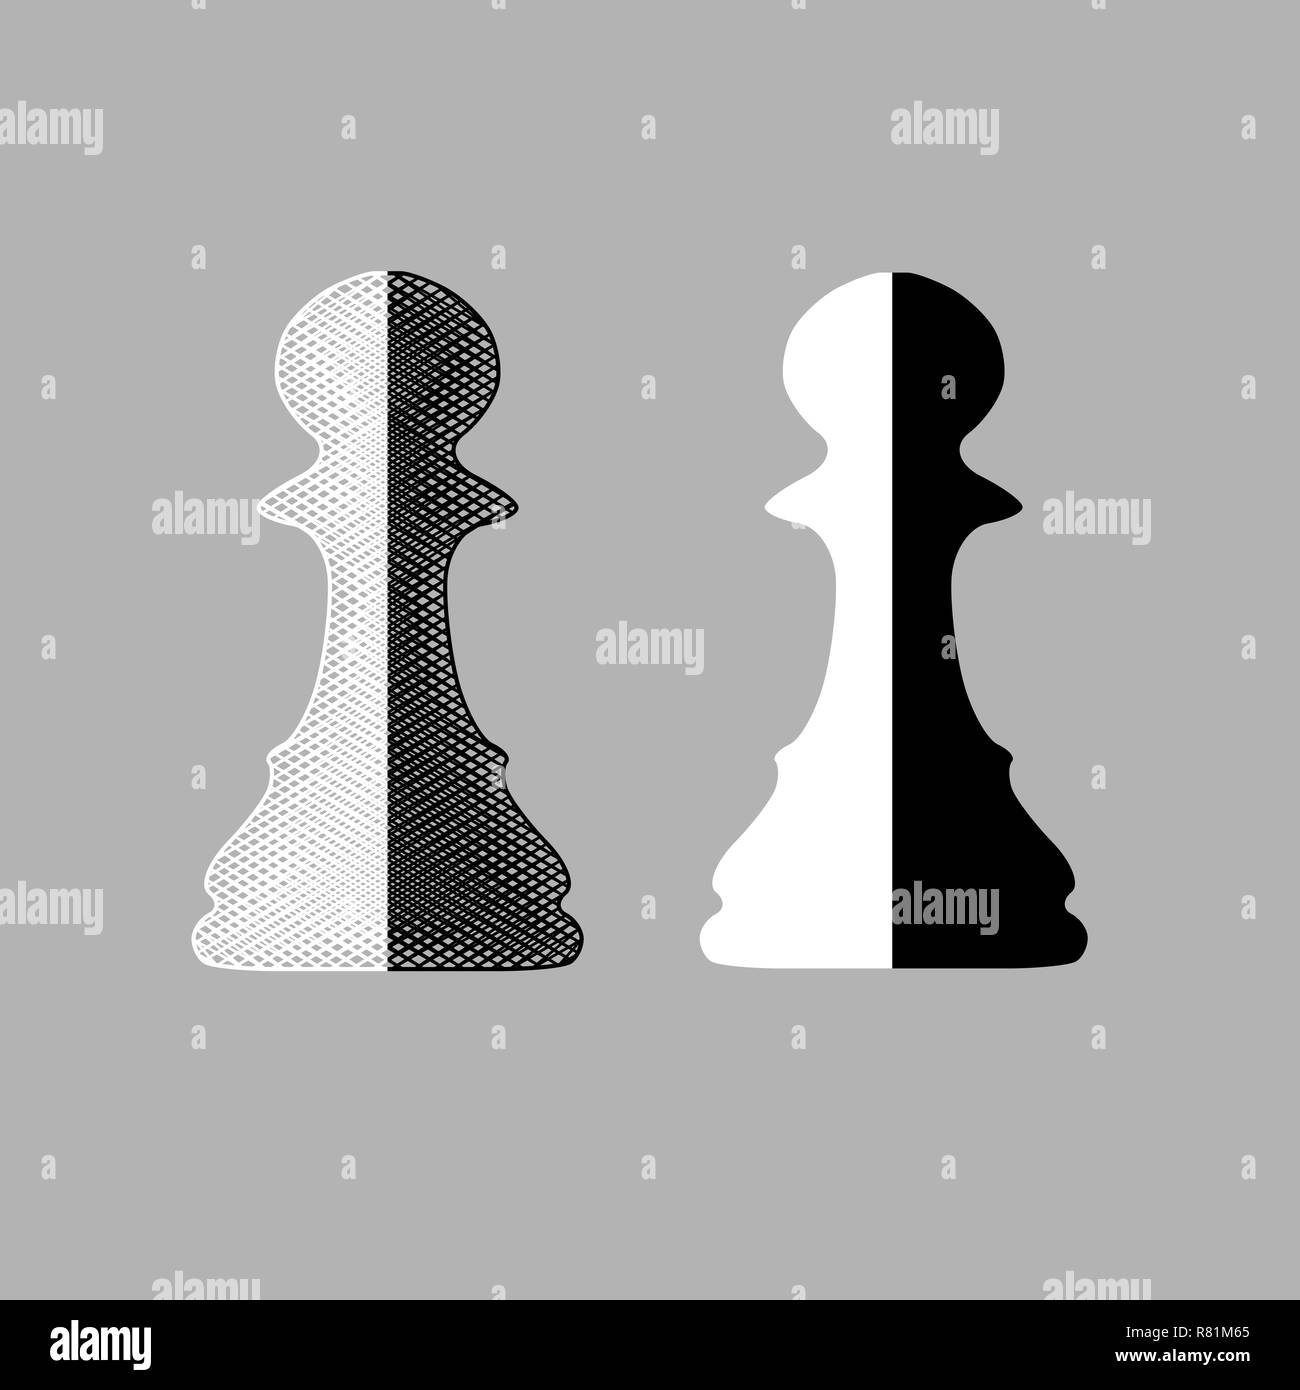 Black and white chess pawns isolated on gray background Stock Vector